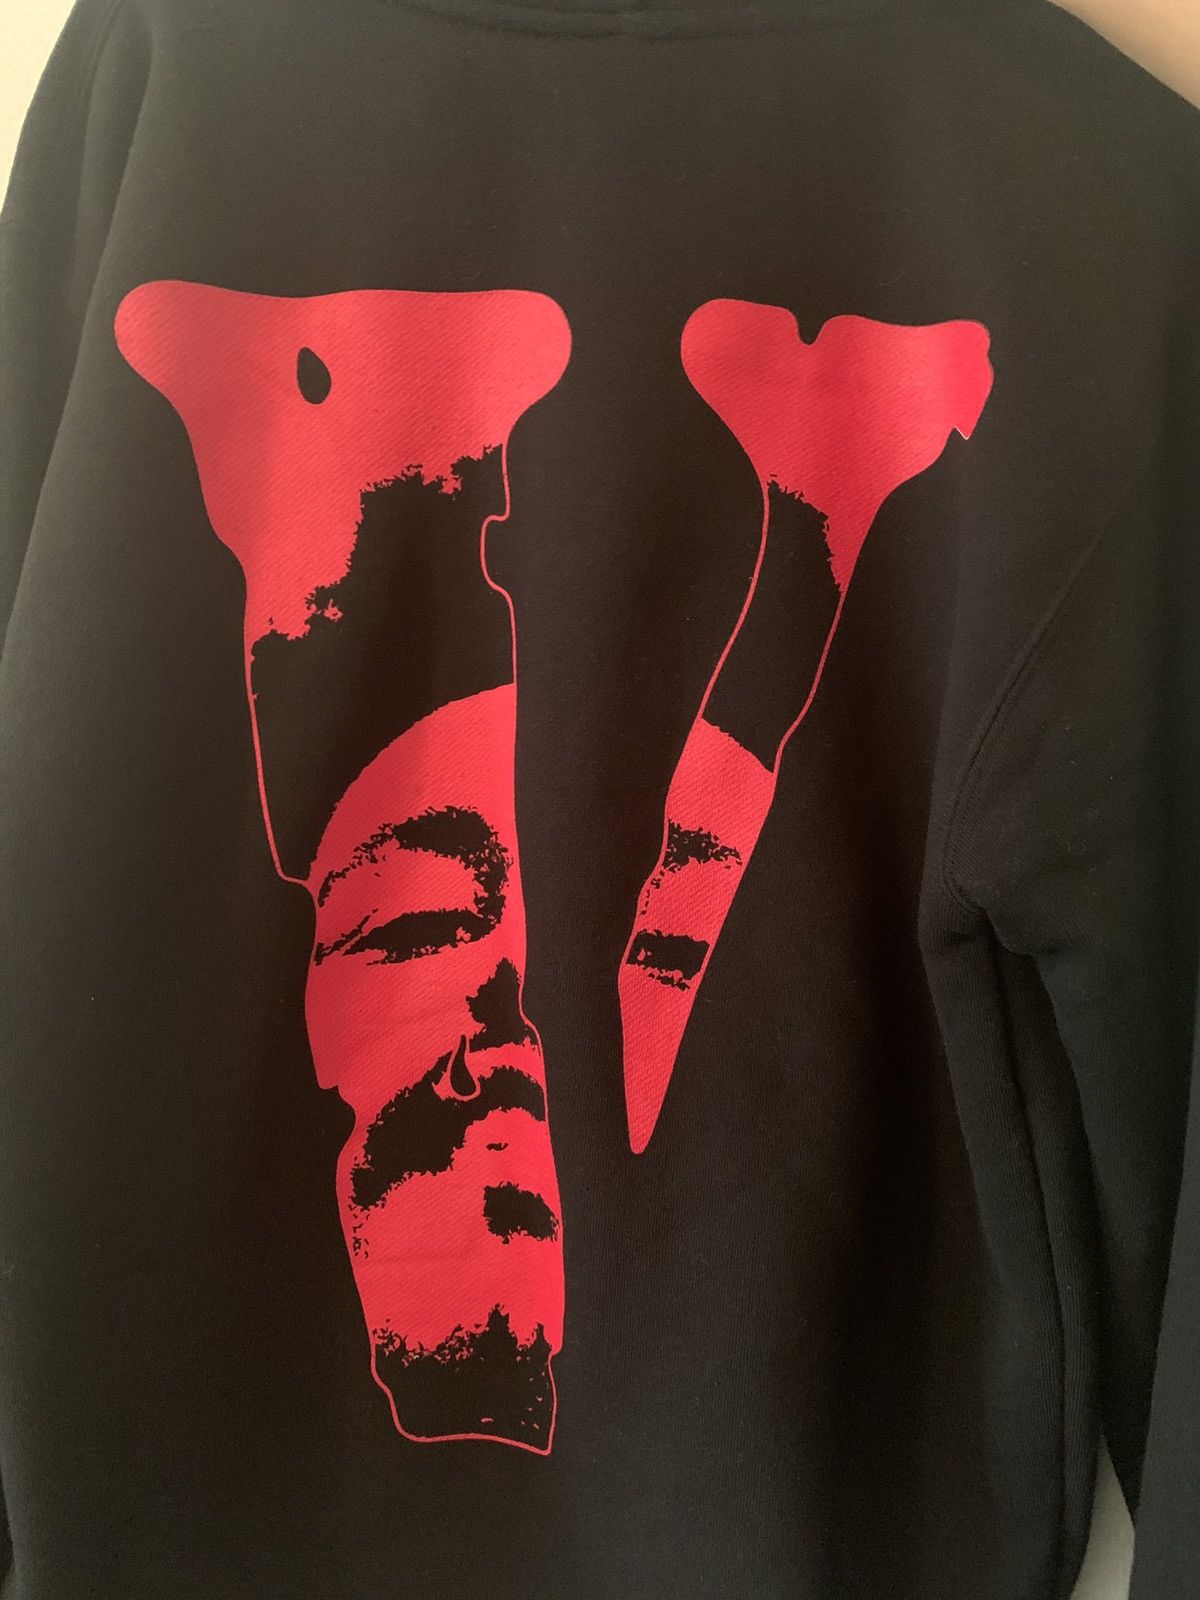 The Weeknd After Hours Blood Drip Hoodie - The Weeknd Store